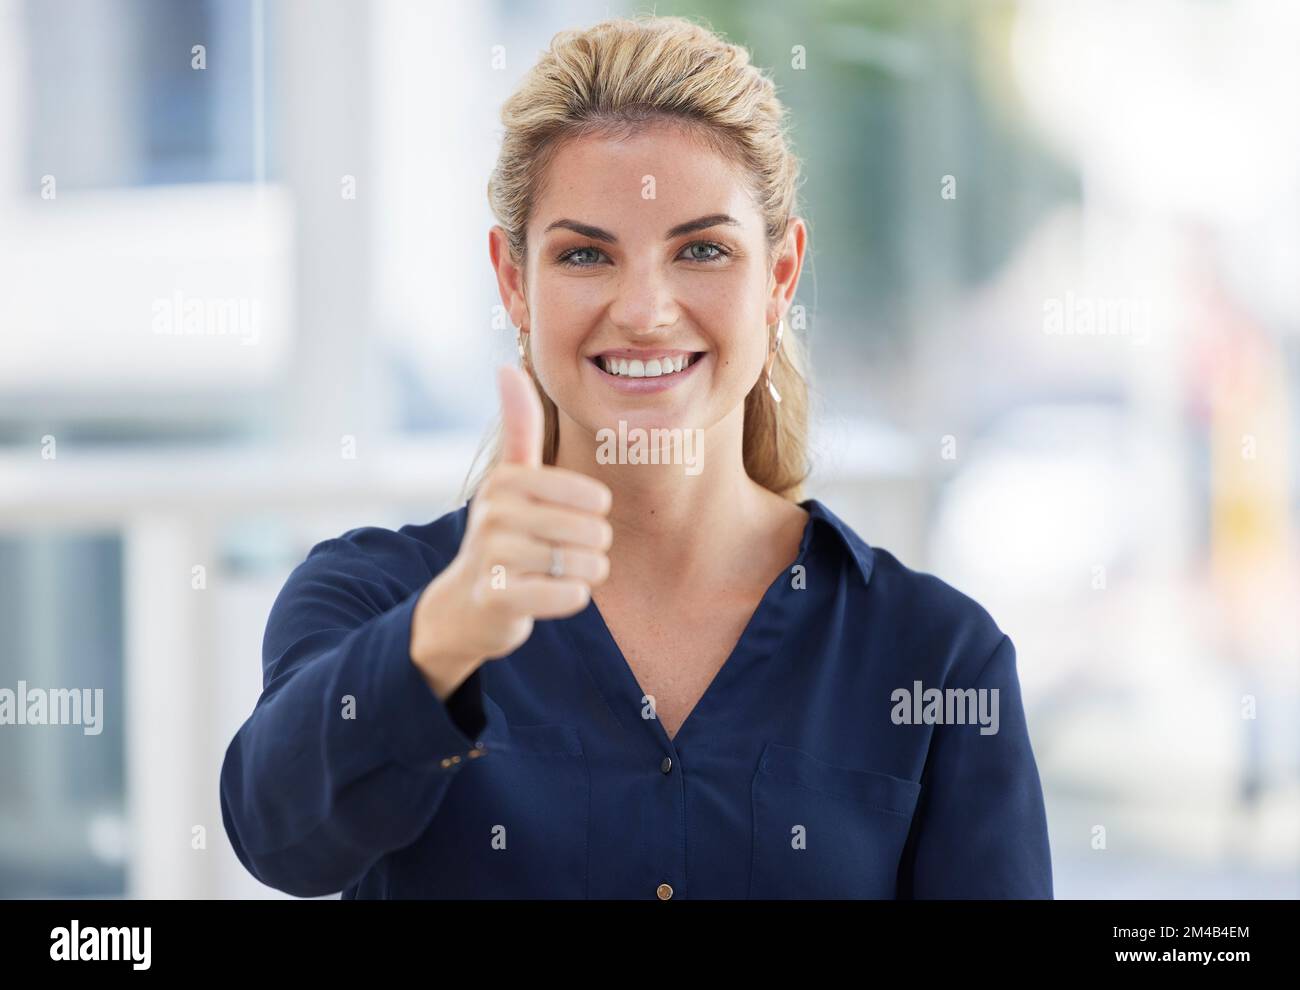 Thumbs up, woman face portrait and smile in office for business success, corporate achievement and entrepreneur motivation. Leadership confidence, ceo Stock Photo